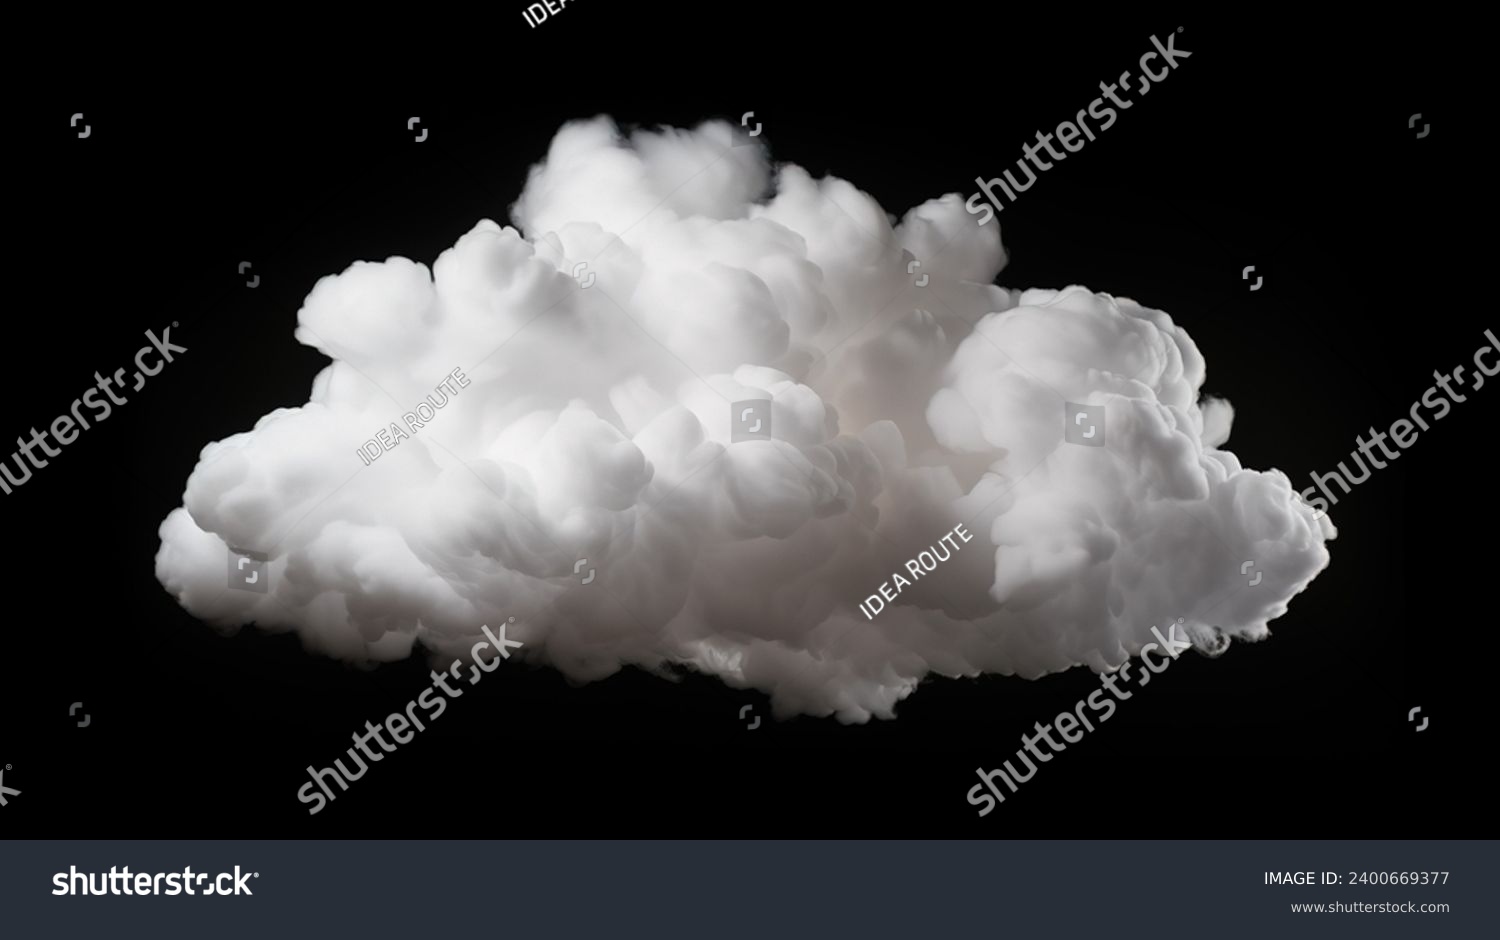 Single cloud in air, isolated on black background. Fog, white clouds or haze For designs isolated on black background. Abstract cloud. Cloud or dust isolated on black, abstract cloud. #2400669377